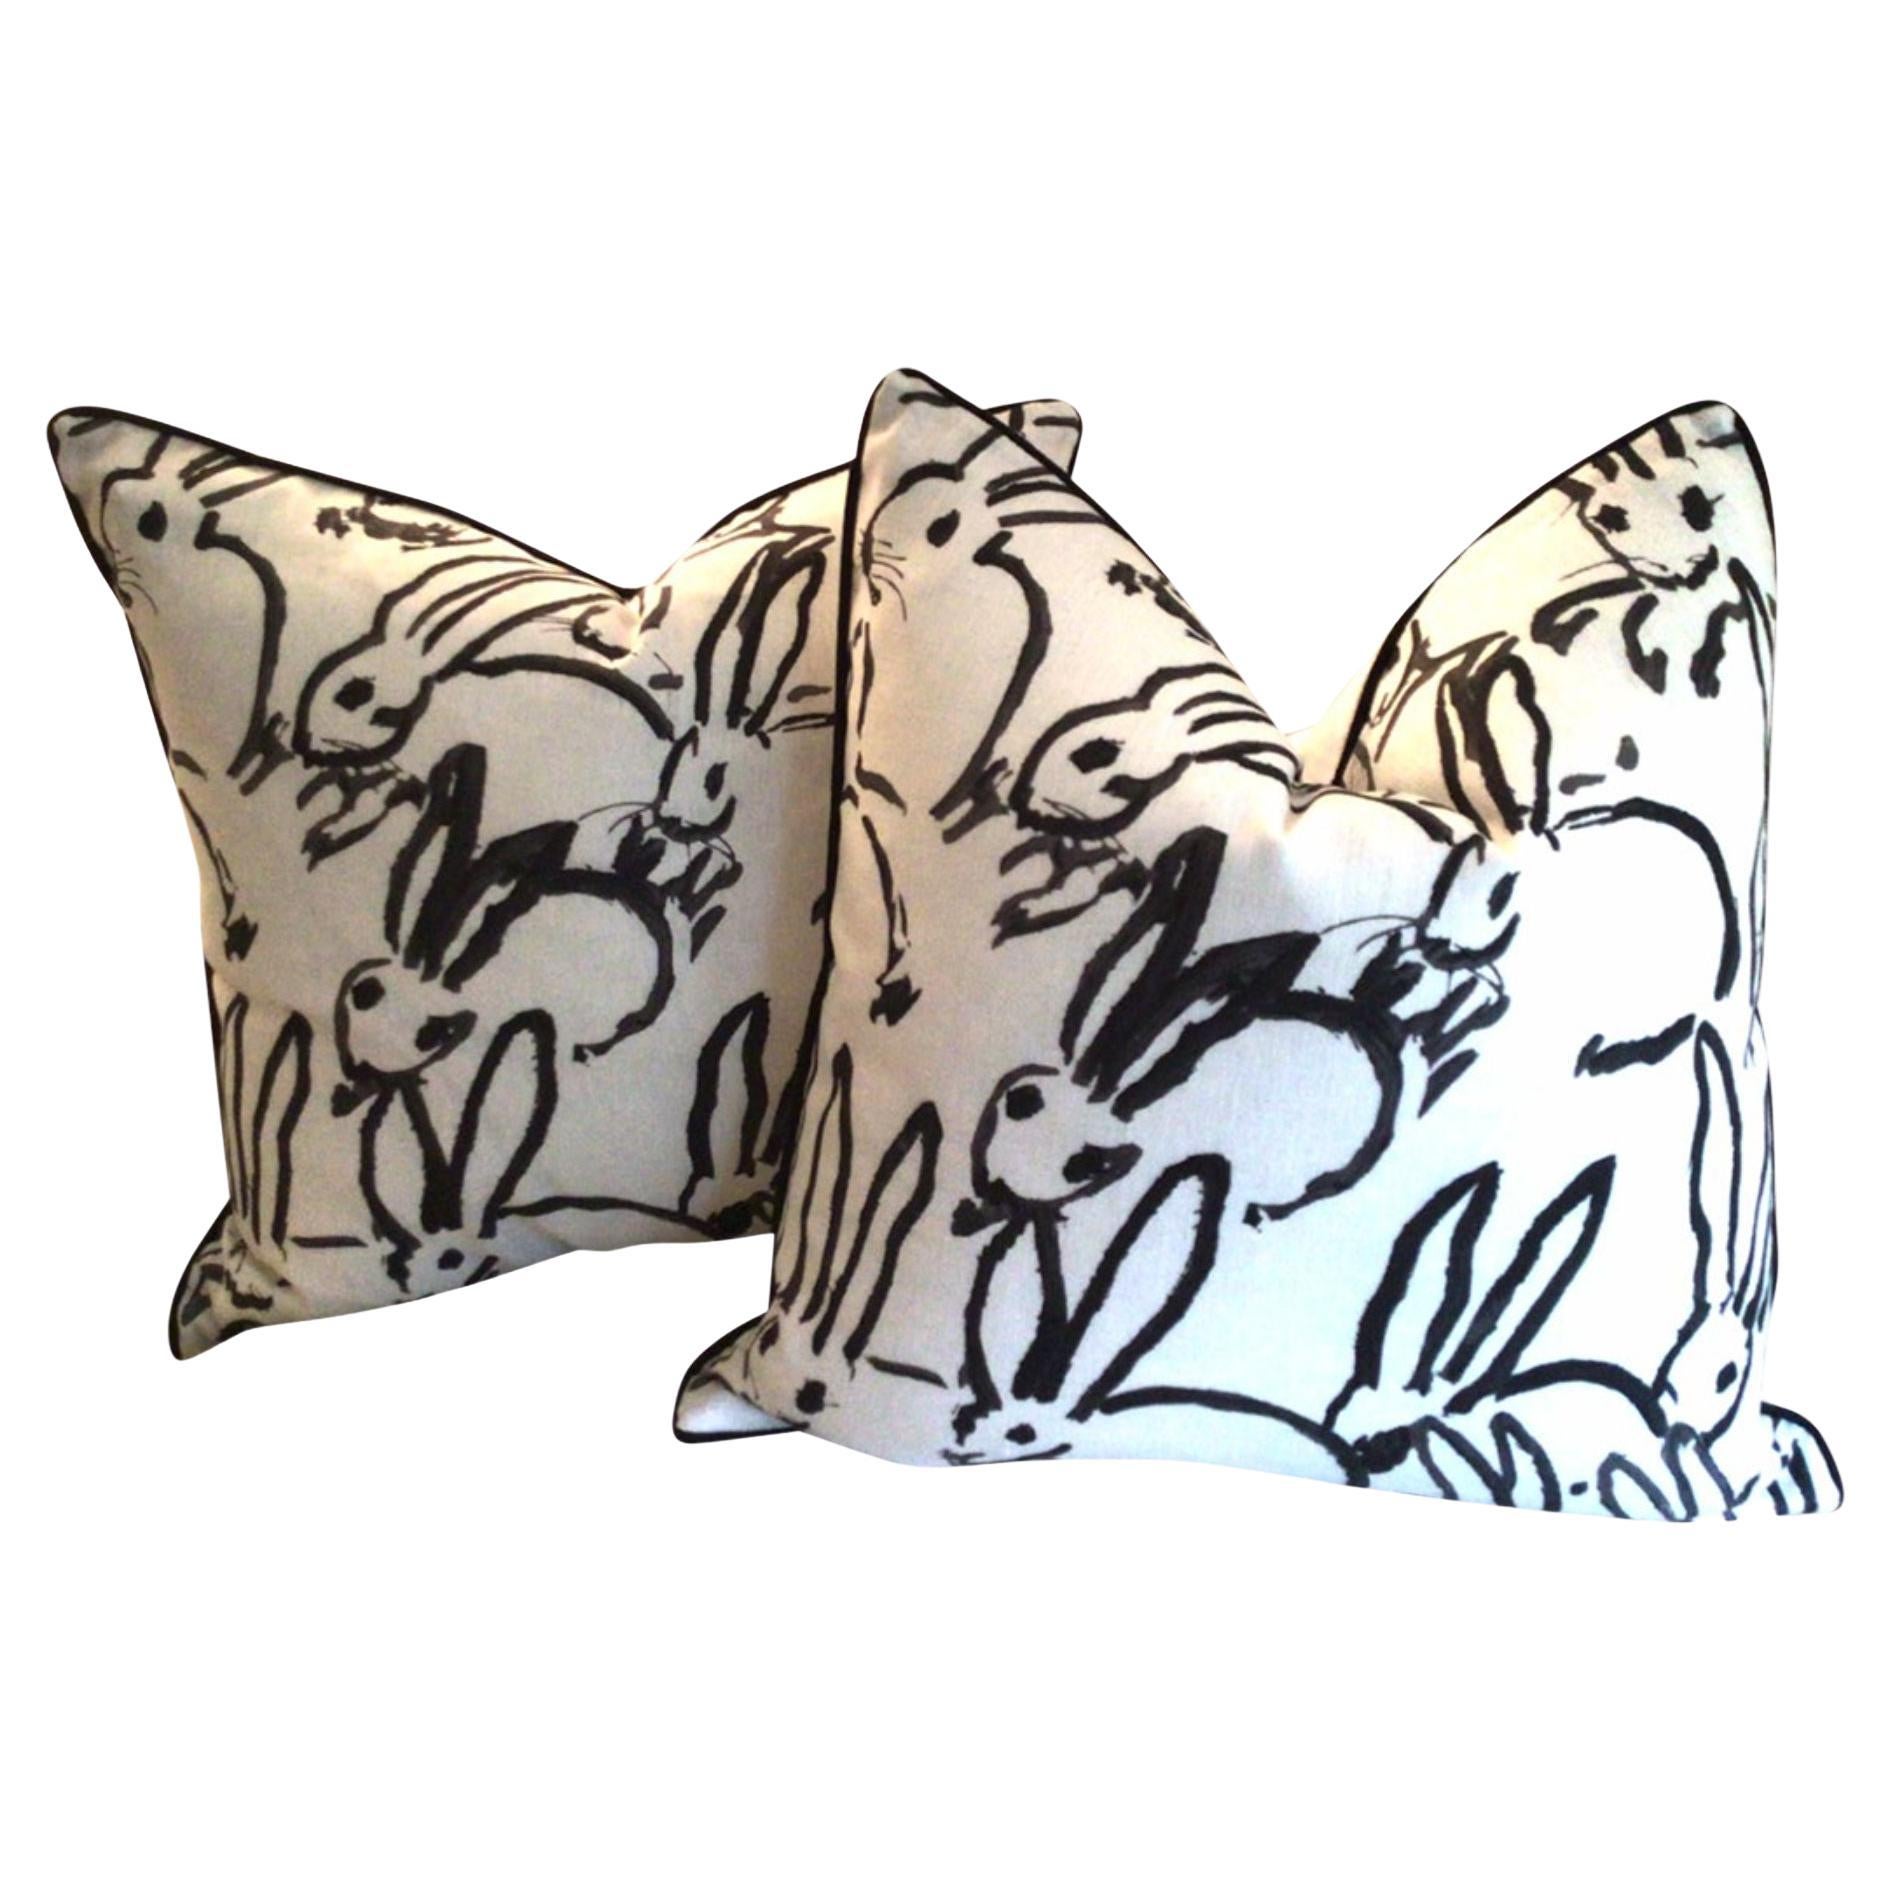 Hunt Slonem "Bunny Hutch" in Black & White Pillows - a Pair For Sale